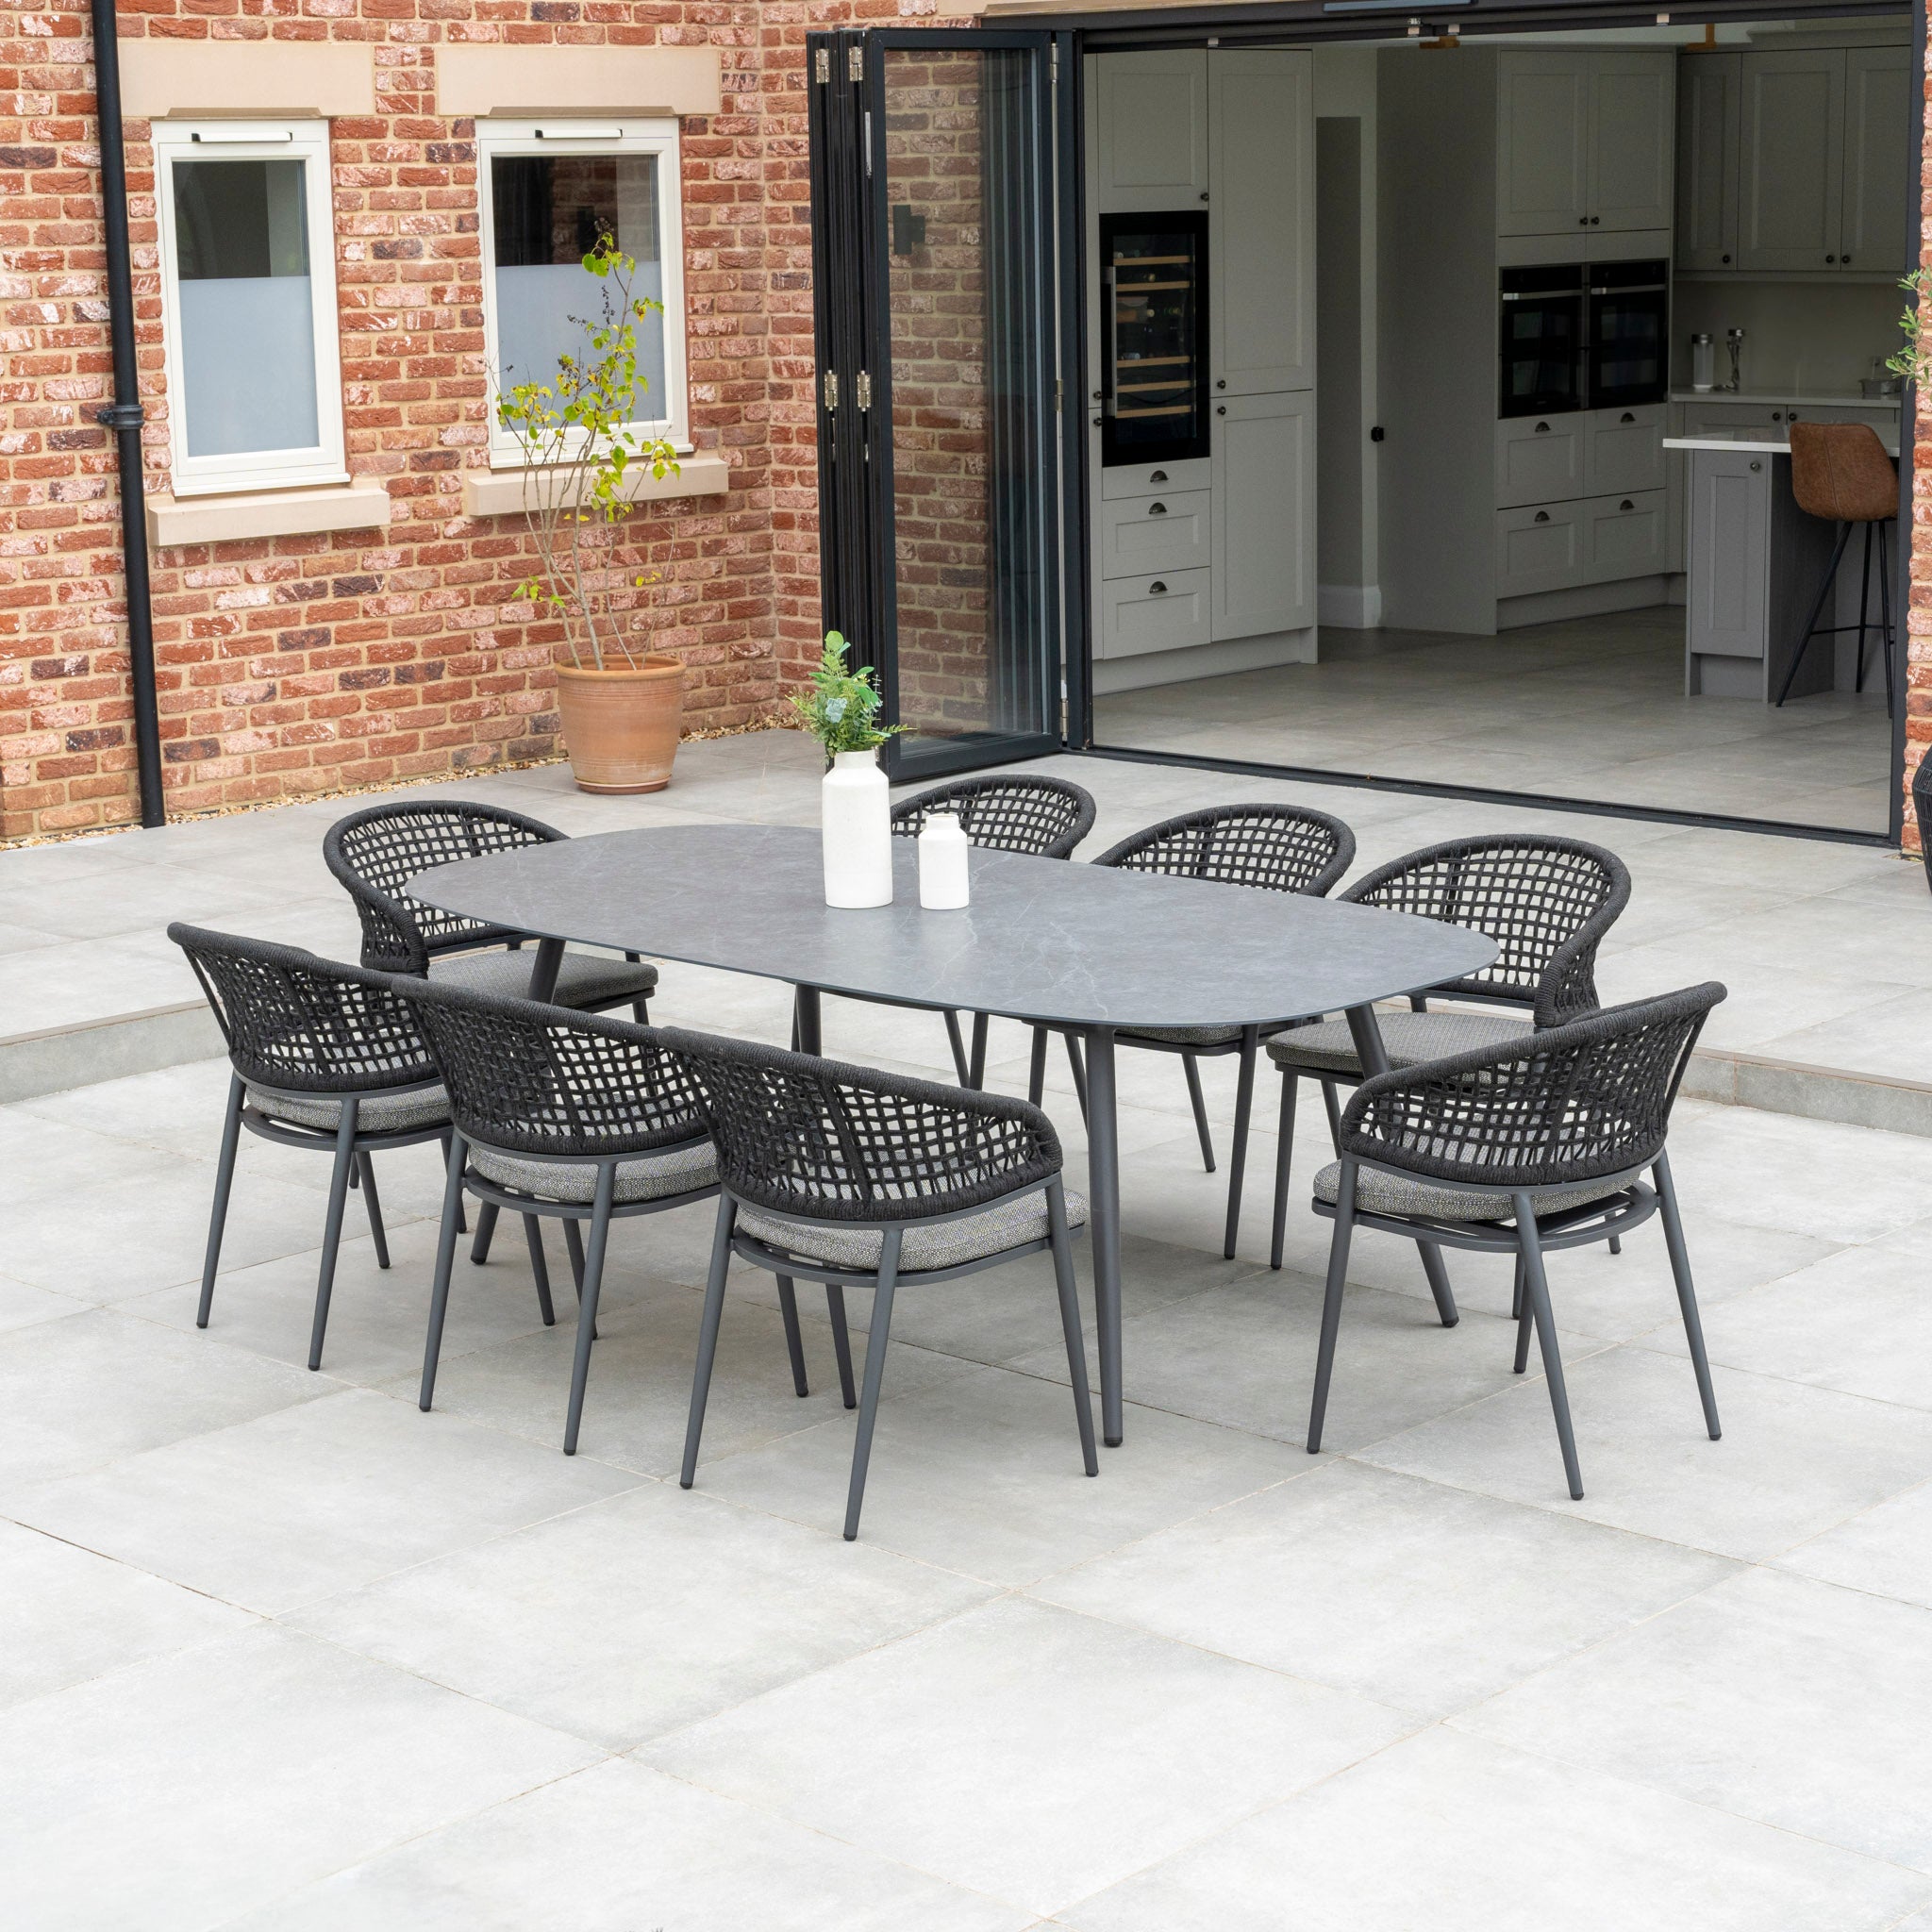 Kalama 8 Seat Rope Oval Dining Set with Ceramic Table in Charcoal